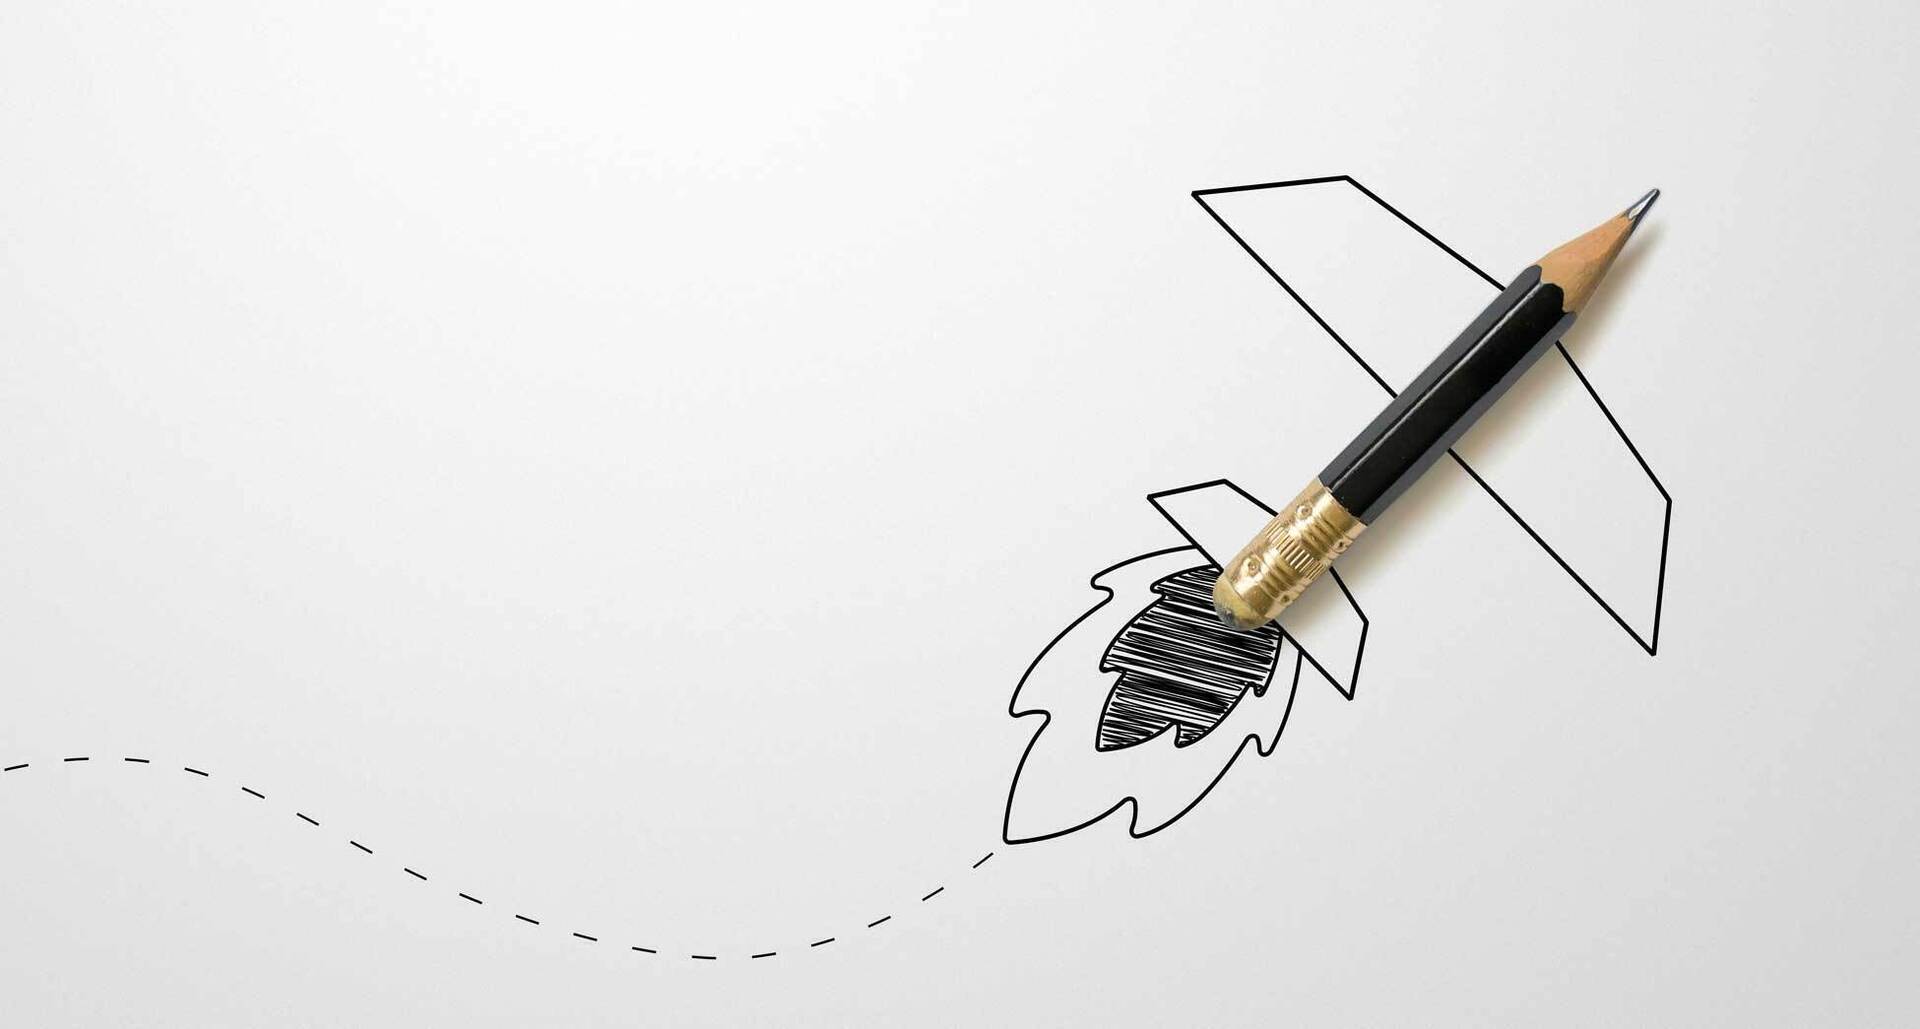 Pencil with illustrated wings and flames resembling a rocket.